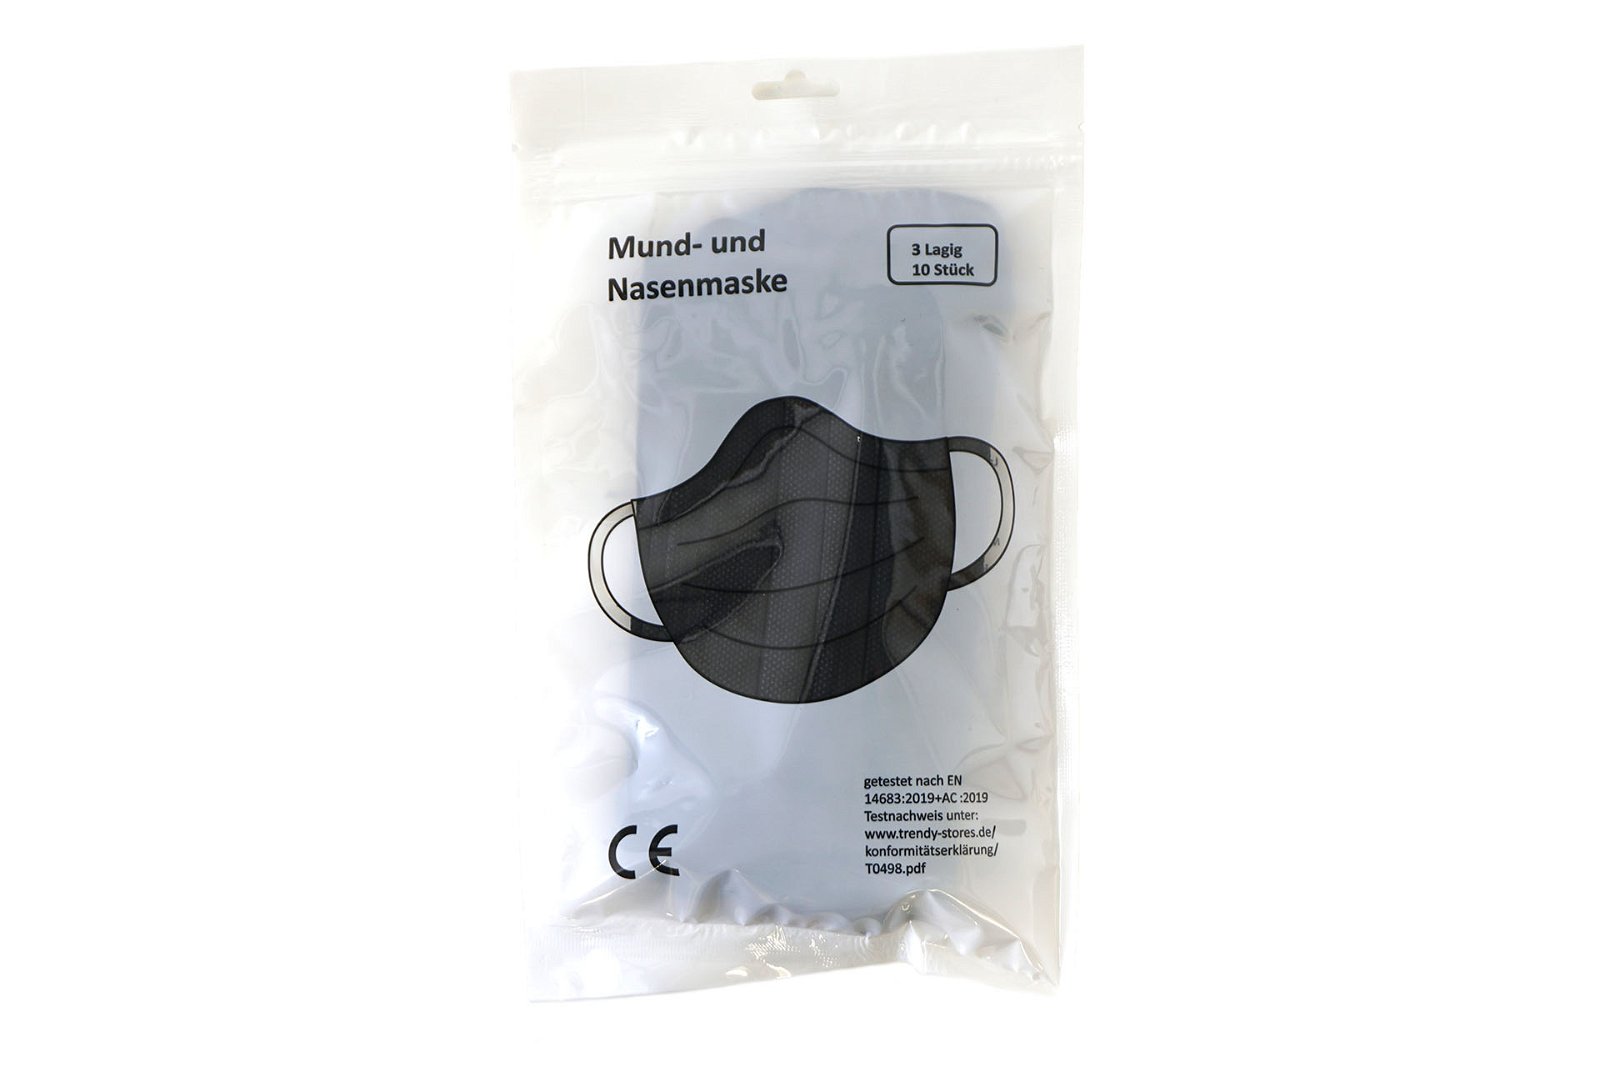 Mouth and nose mask, set of 10, 3-layer face mask, black